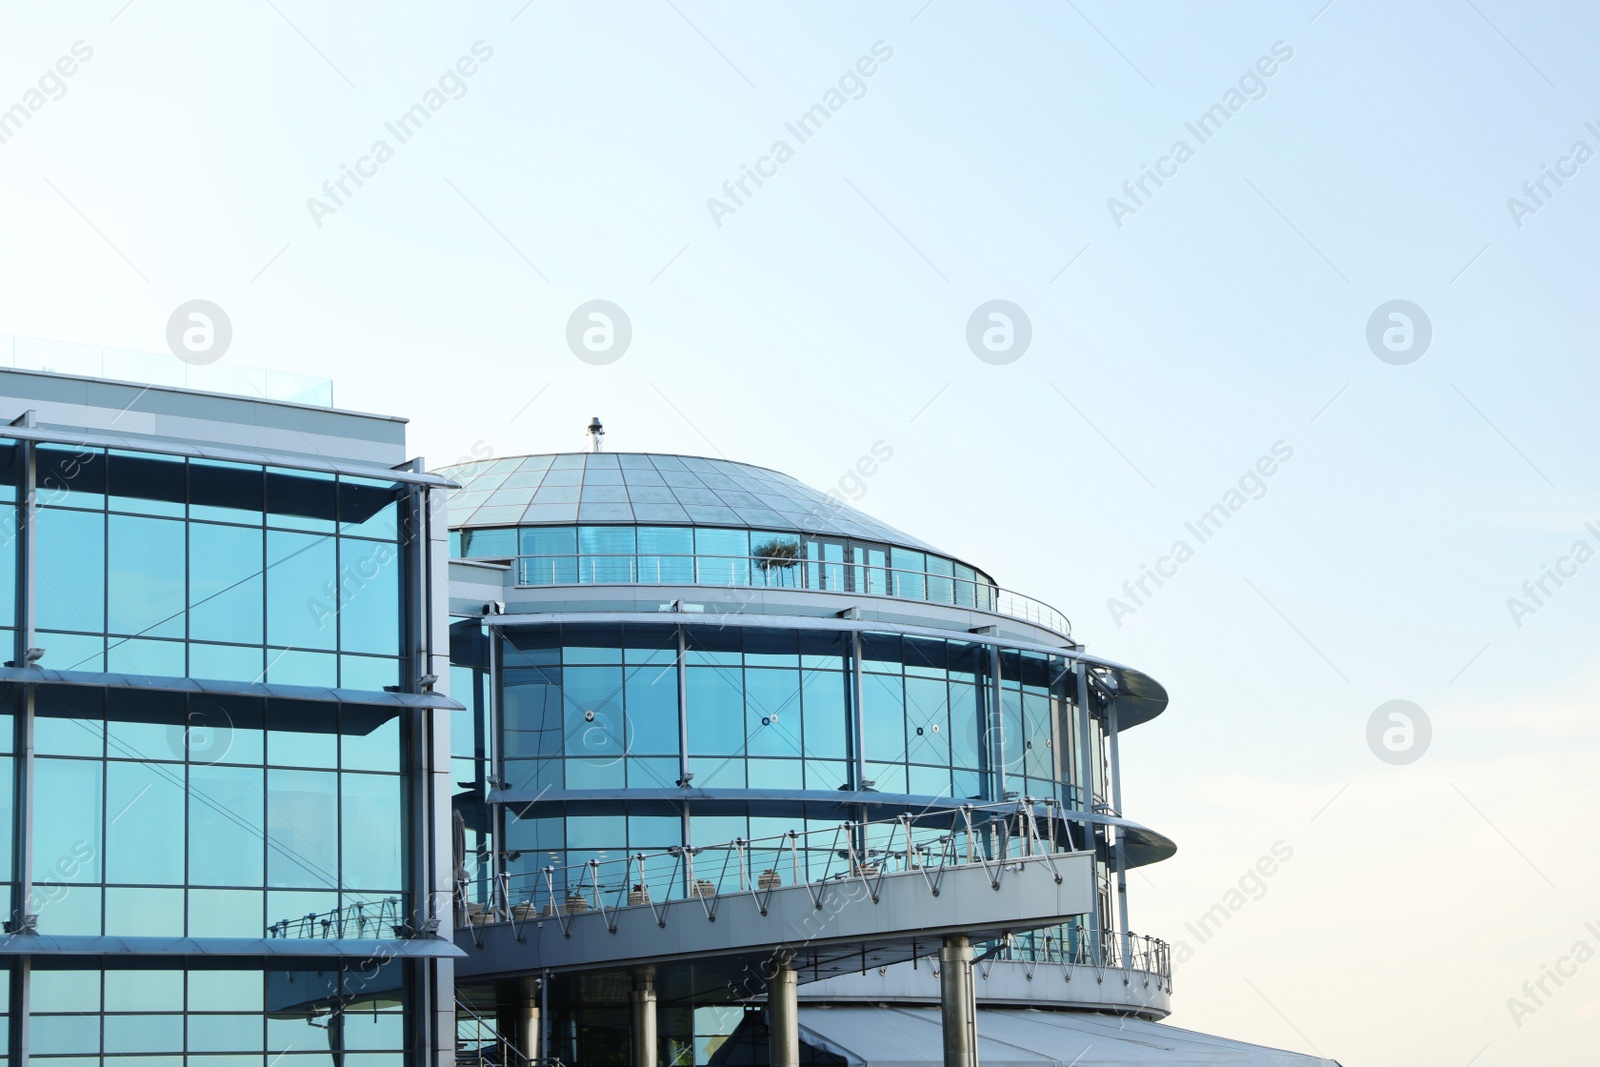 Photo of Modern building with tinted windows against sky. Urban architecture